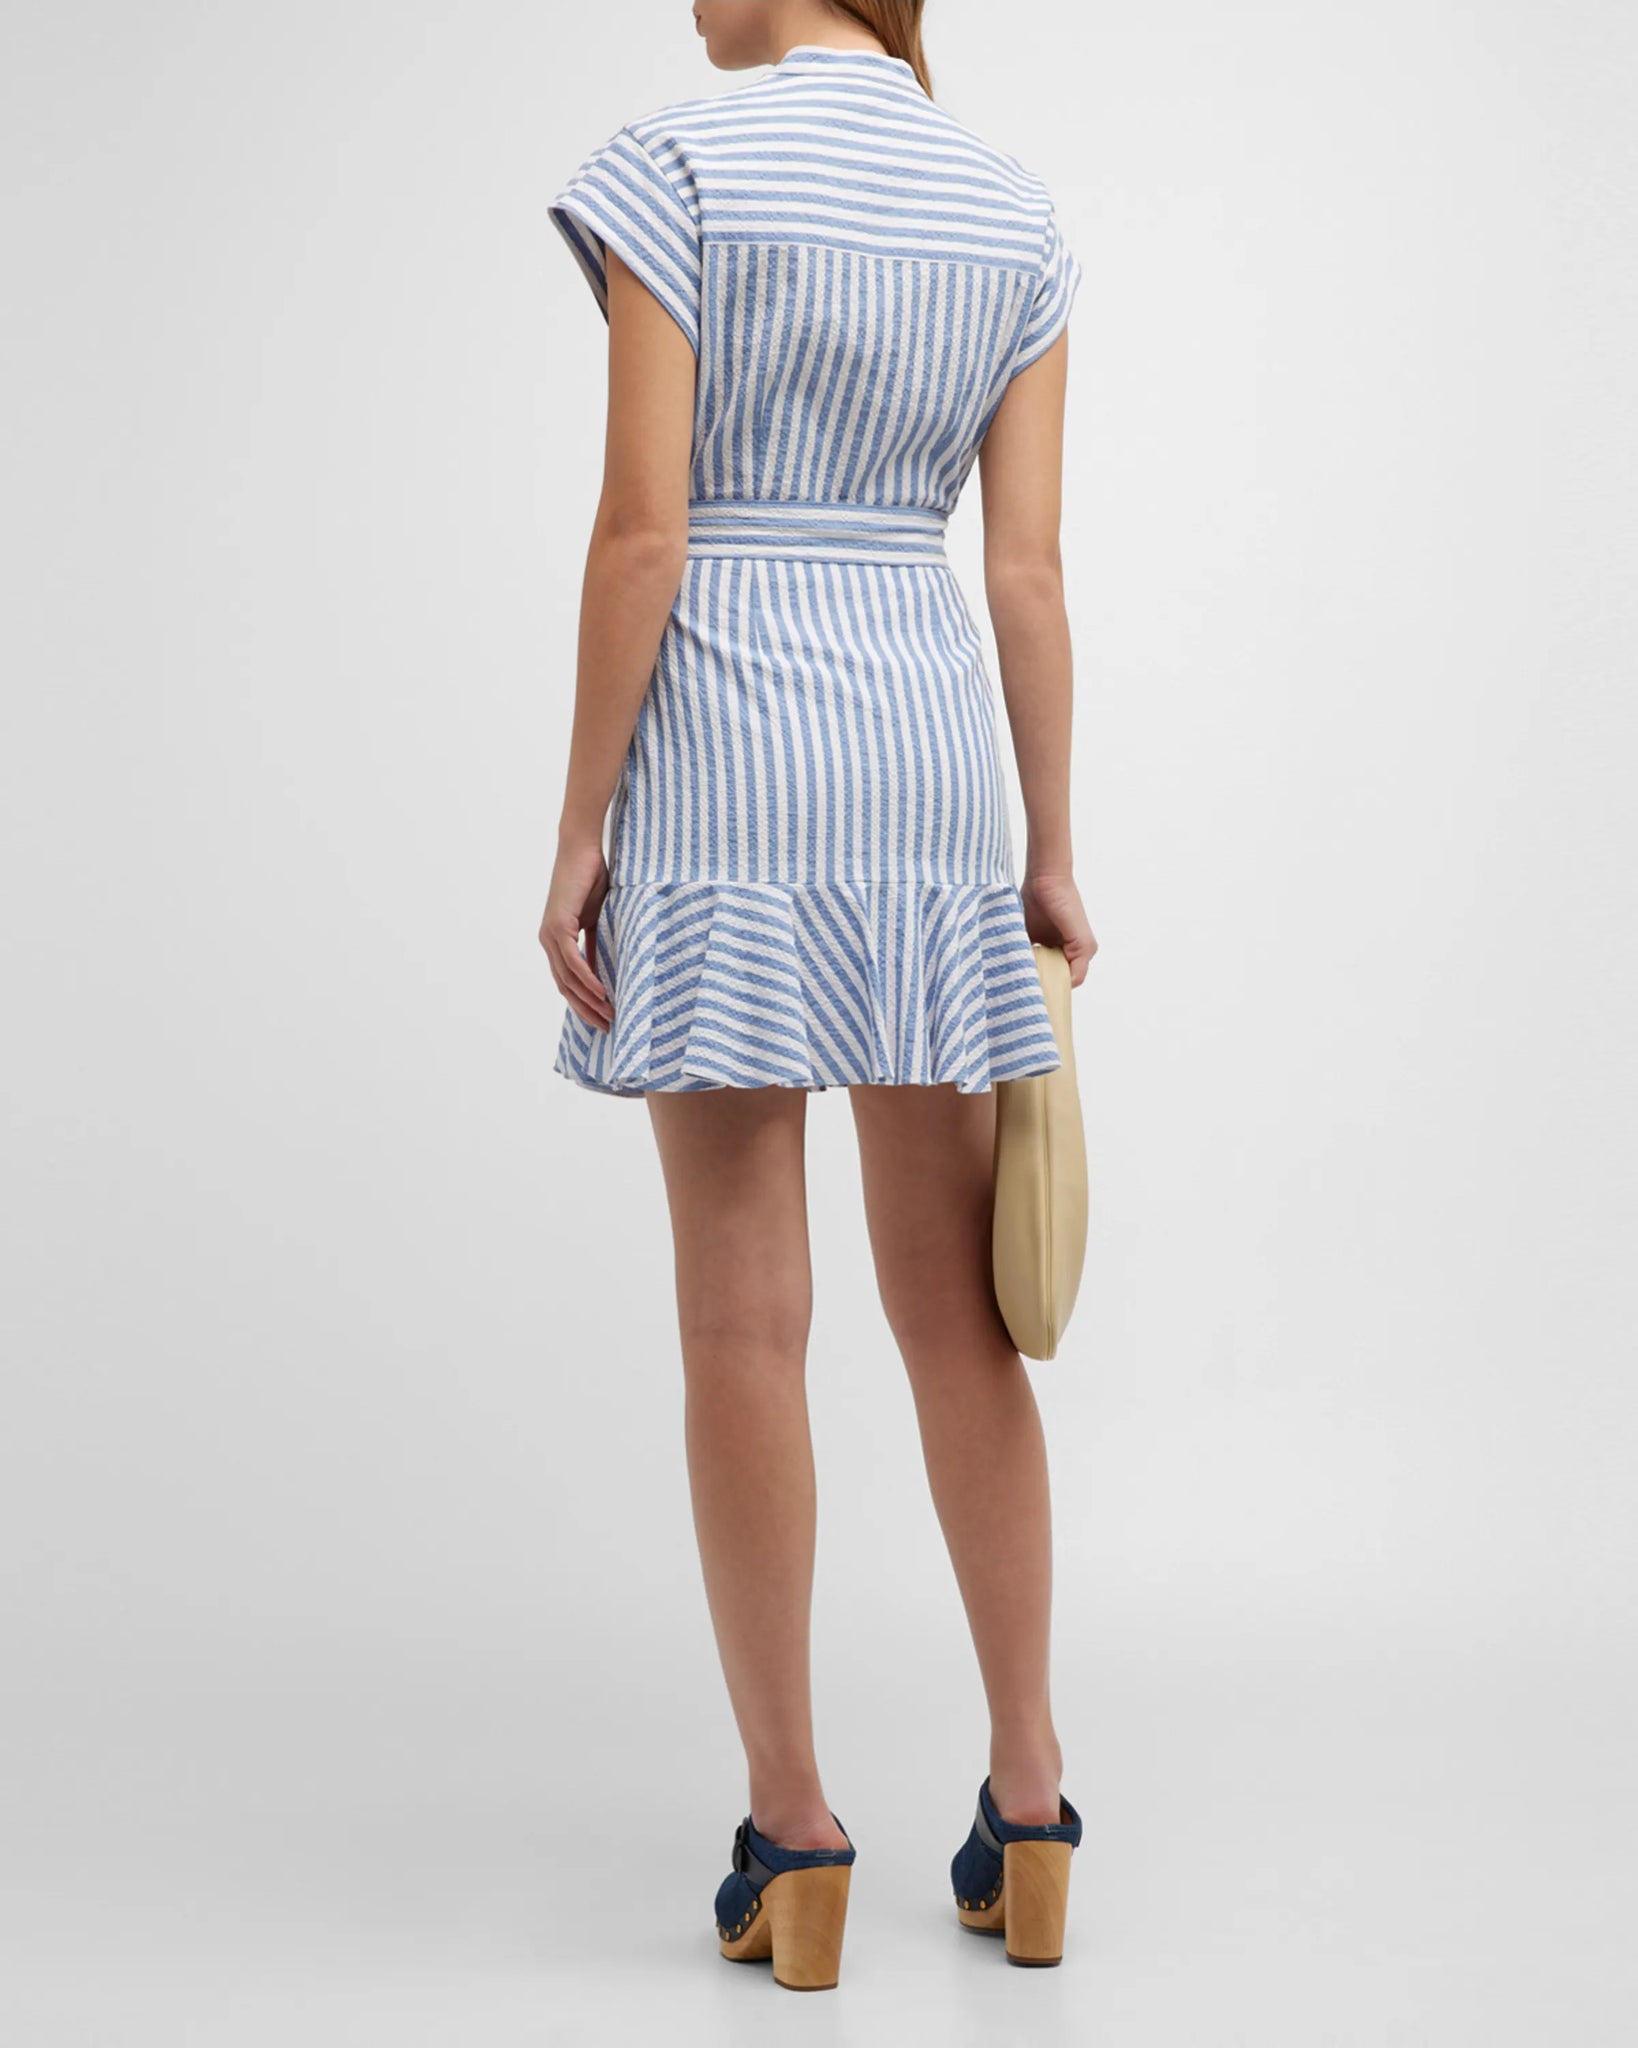 Avella Dress in Washed Blue and White